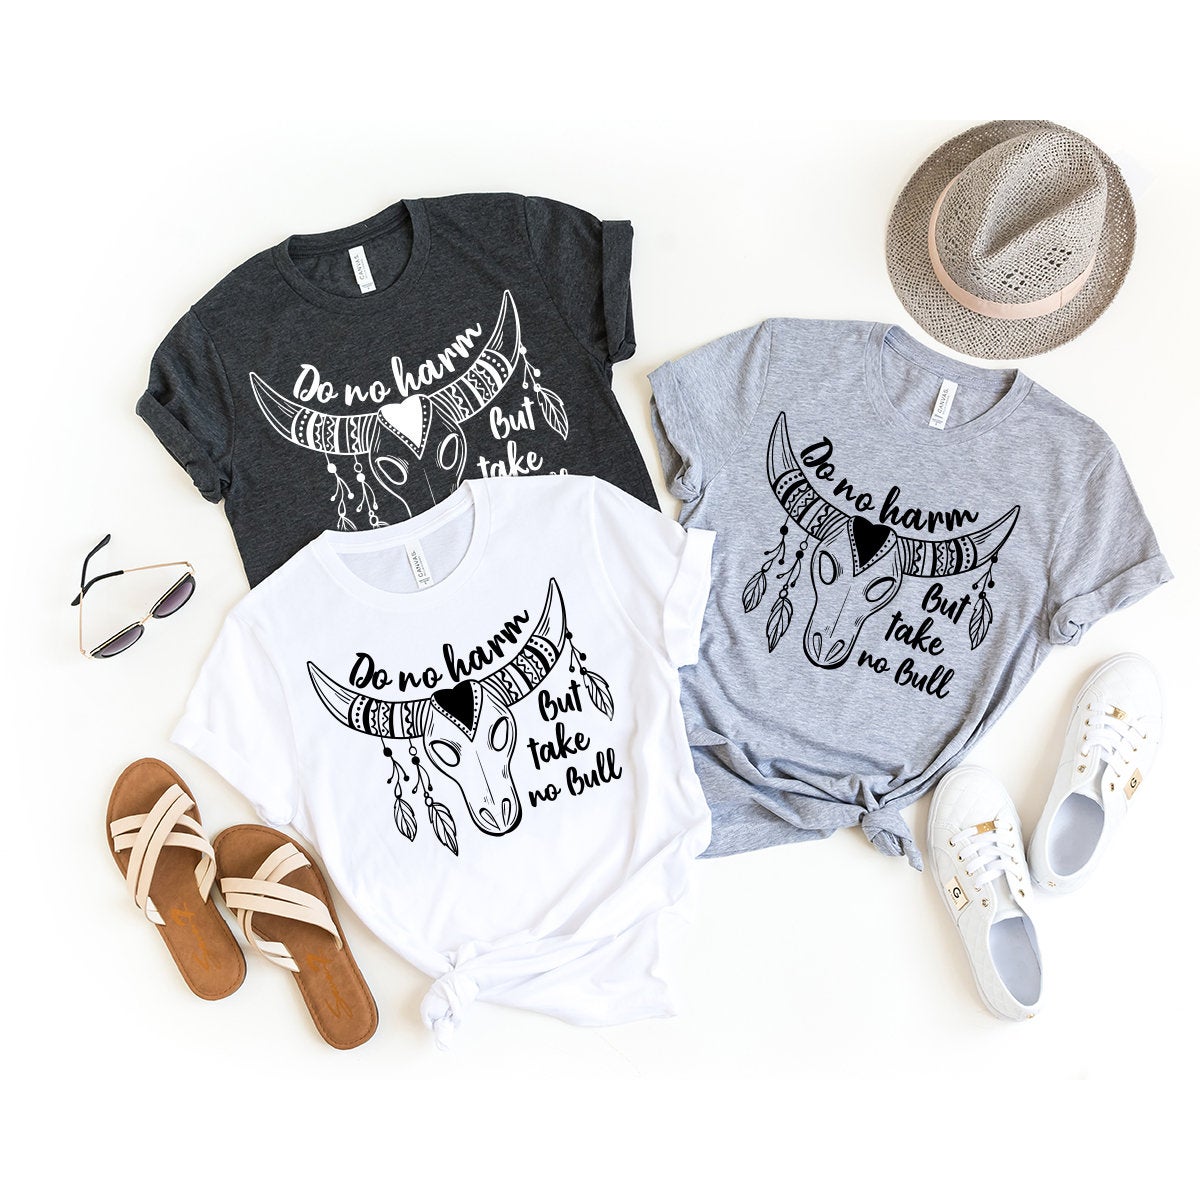 Western Graphic Tee, Country Girl Shirt, Do No Harm But Take No Bull Shirt, Cowgirl T-Shirt, Southern Shirts, Country Music Shirt - Fastdeliverytees.com